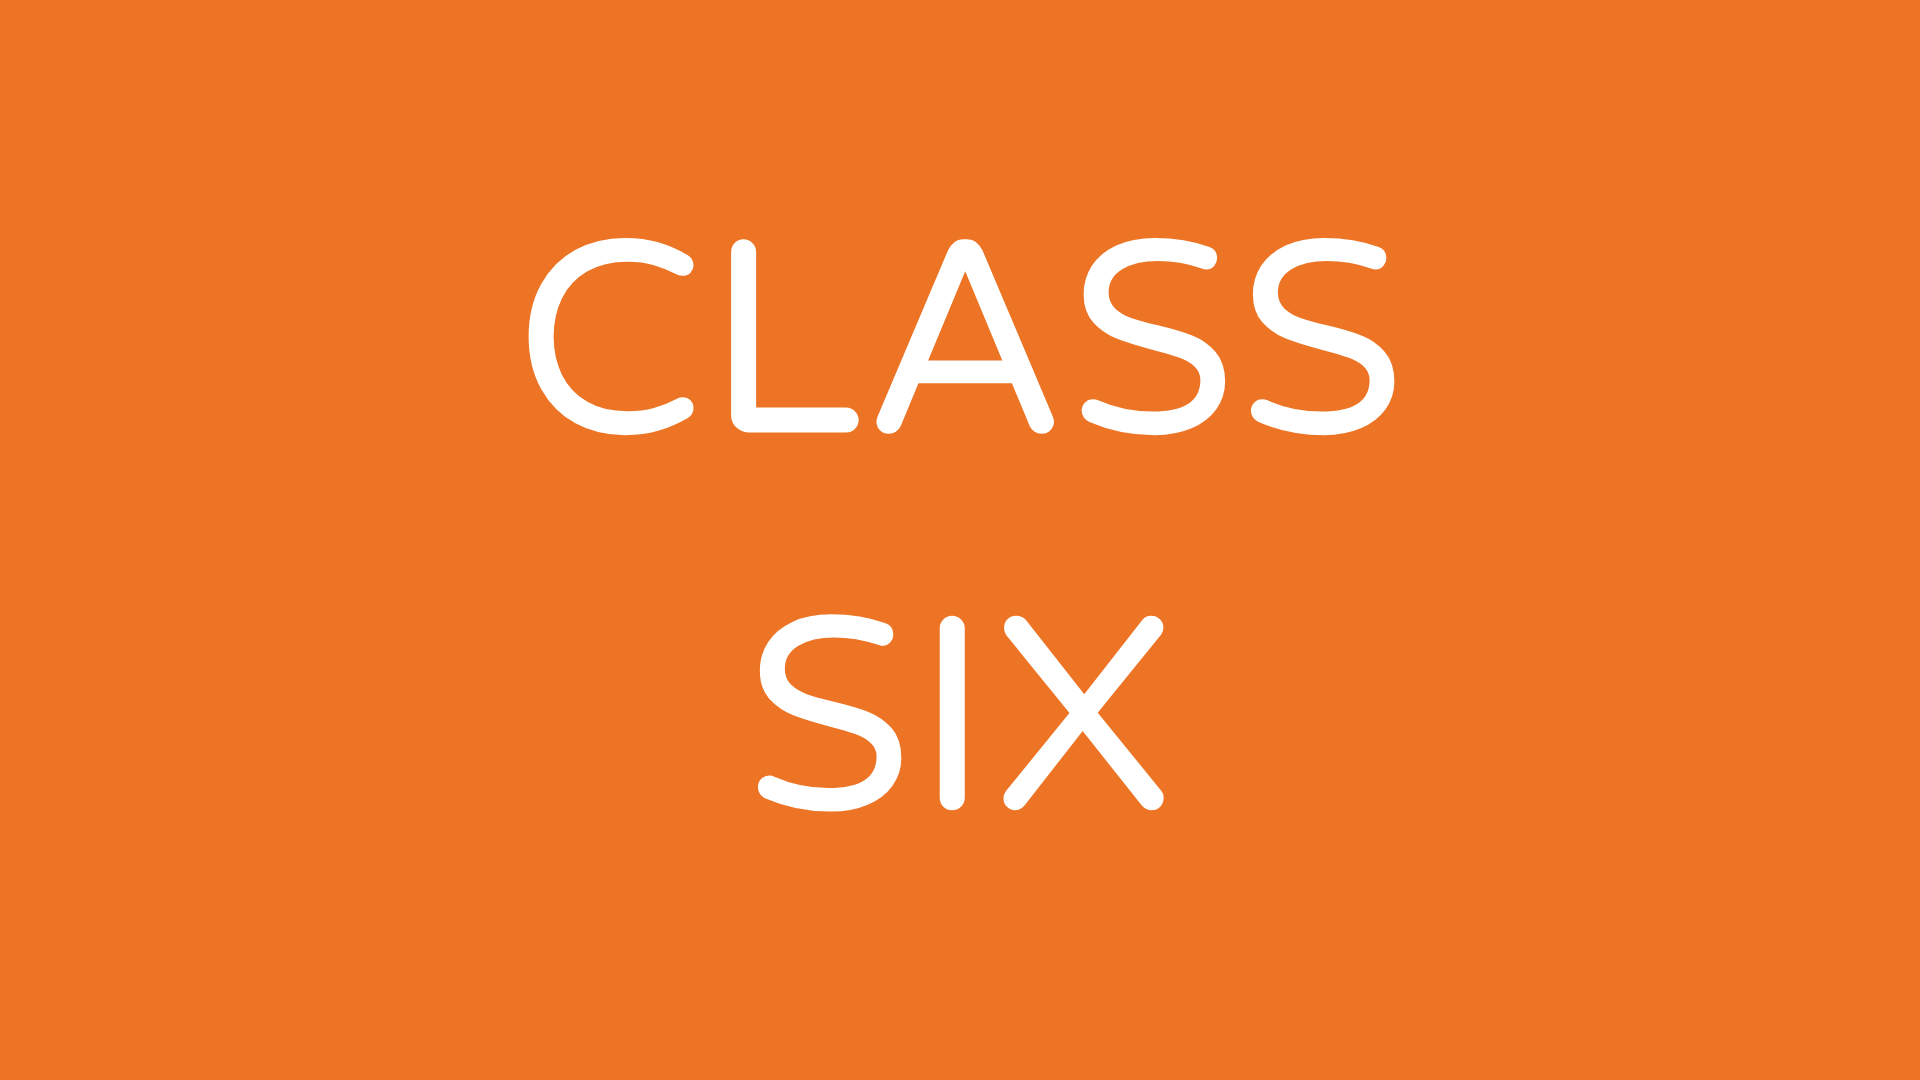 Remote Class Six Cleaning Business Coaching